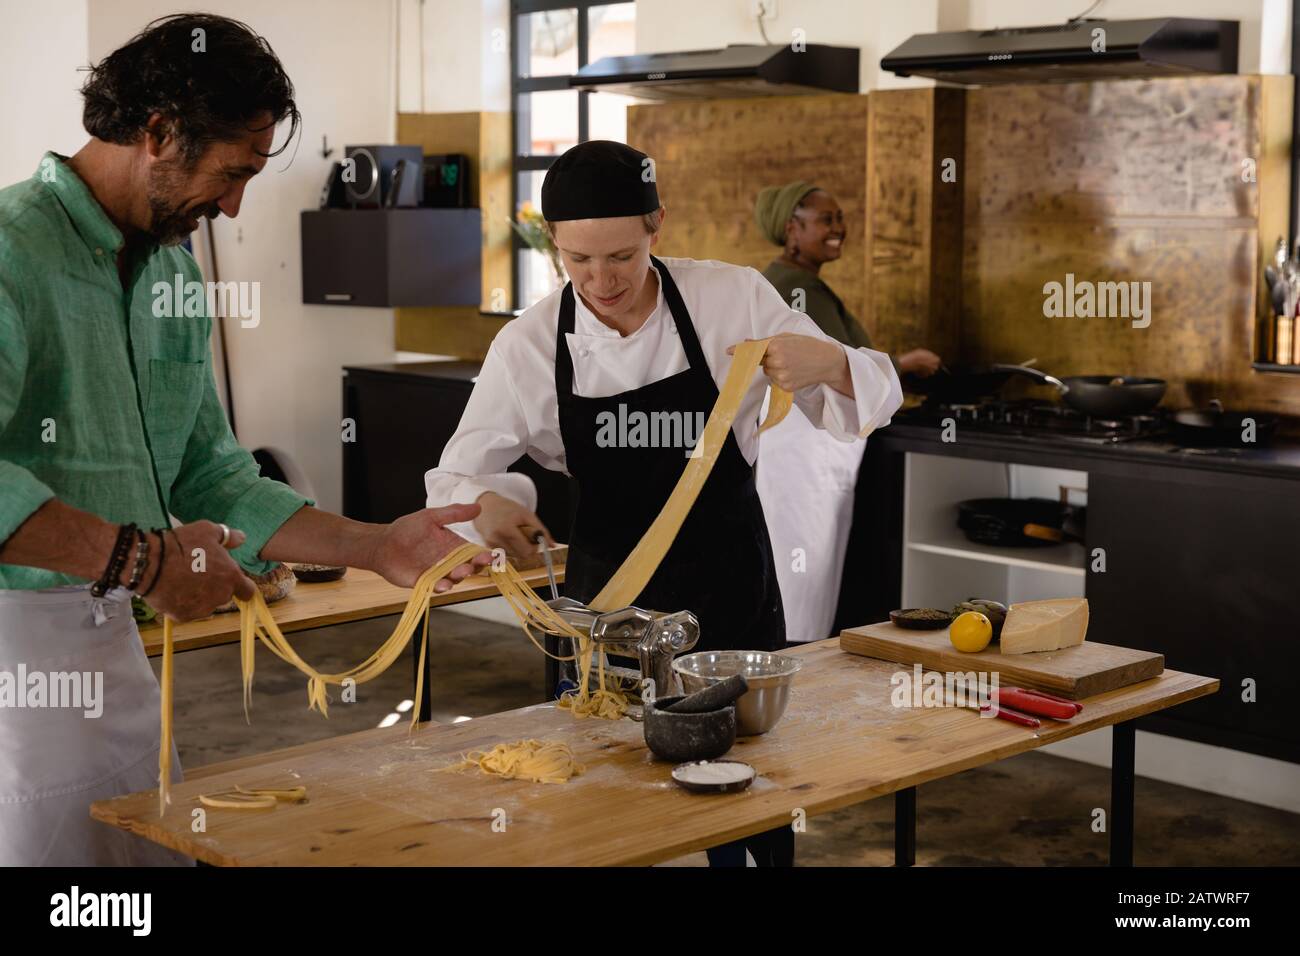 Chefs making pasta together Stock Photo